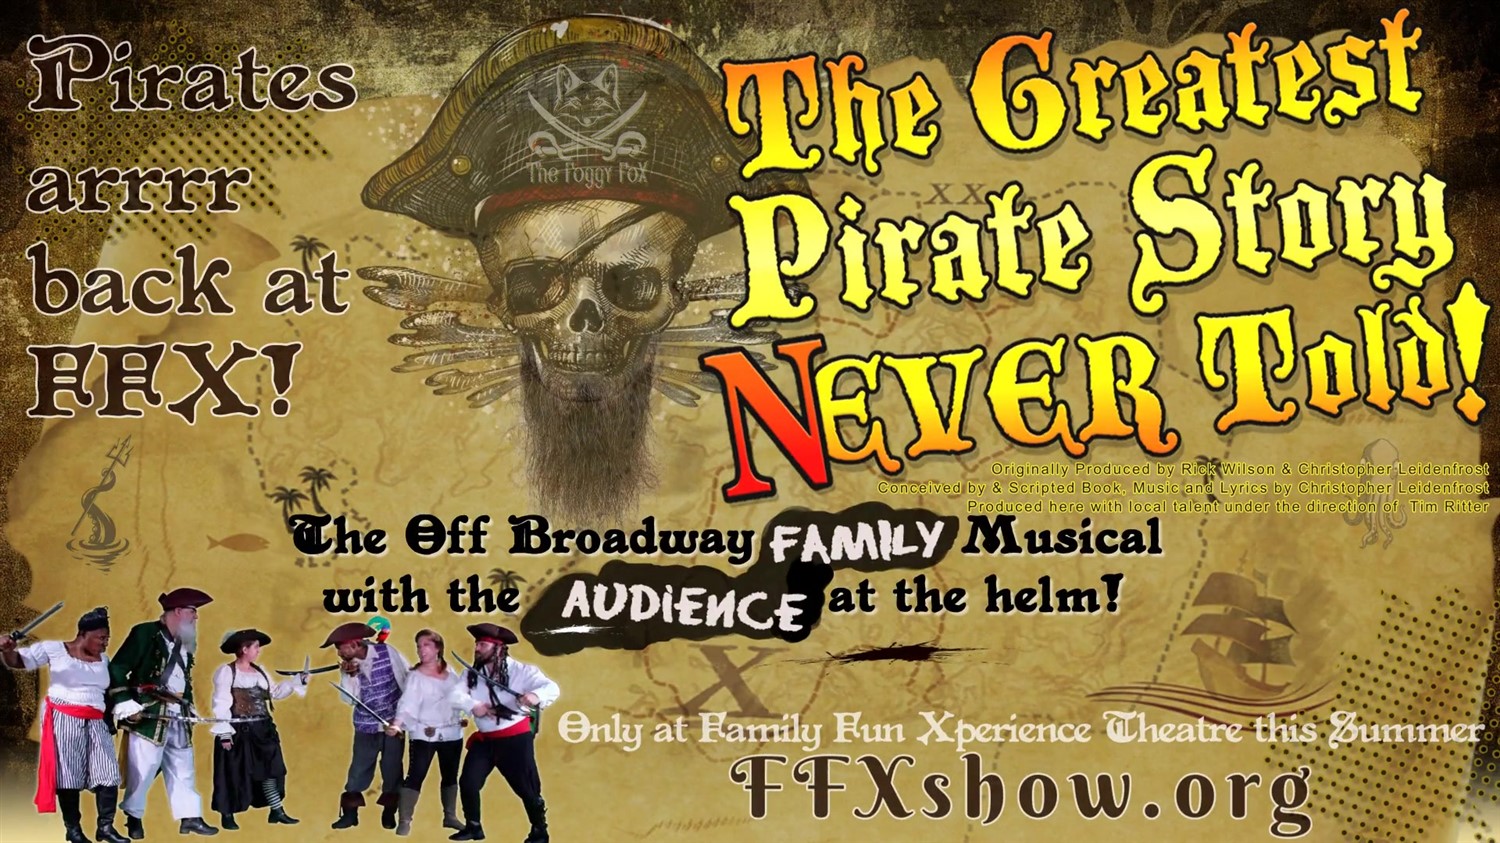 THE GREATEST PIRATE SHOW NEVER TOLD! Off-broadway family musical improv hit show on Jul 17, 19:00@FFX Theatre - Pick a seat, Buy tickets and Get information on Family Fun Xperience tickets.ffxshow.org